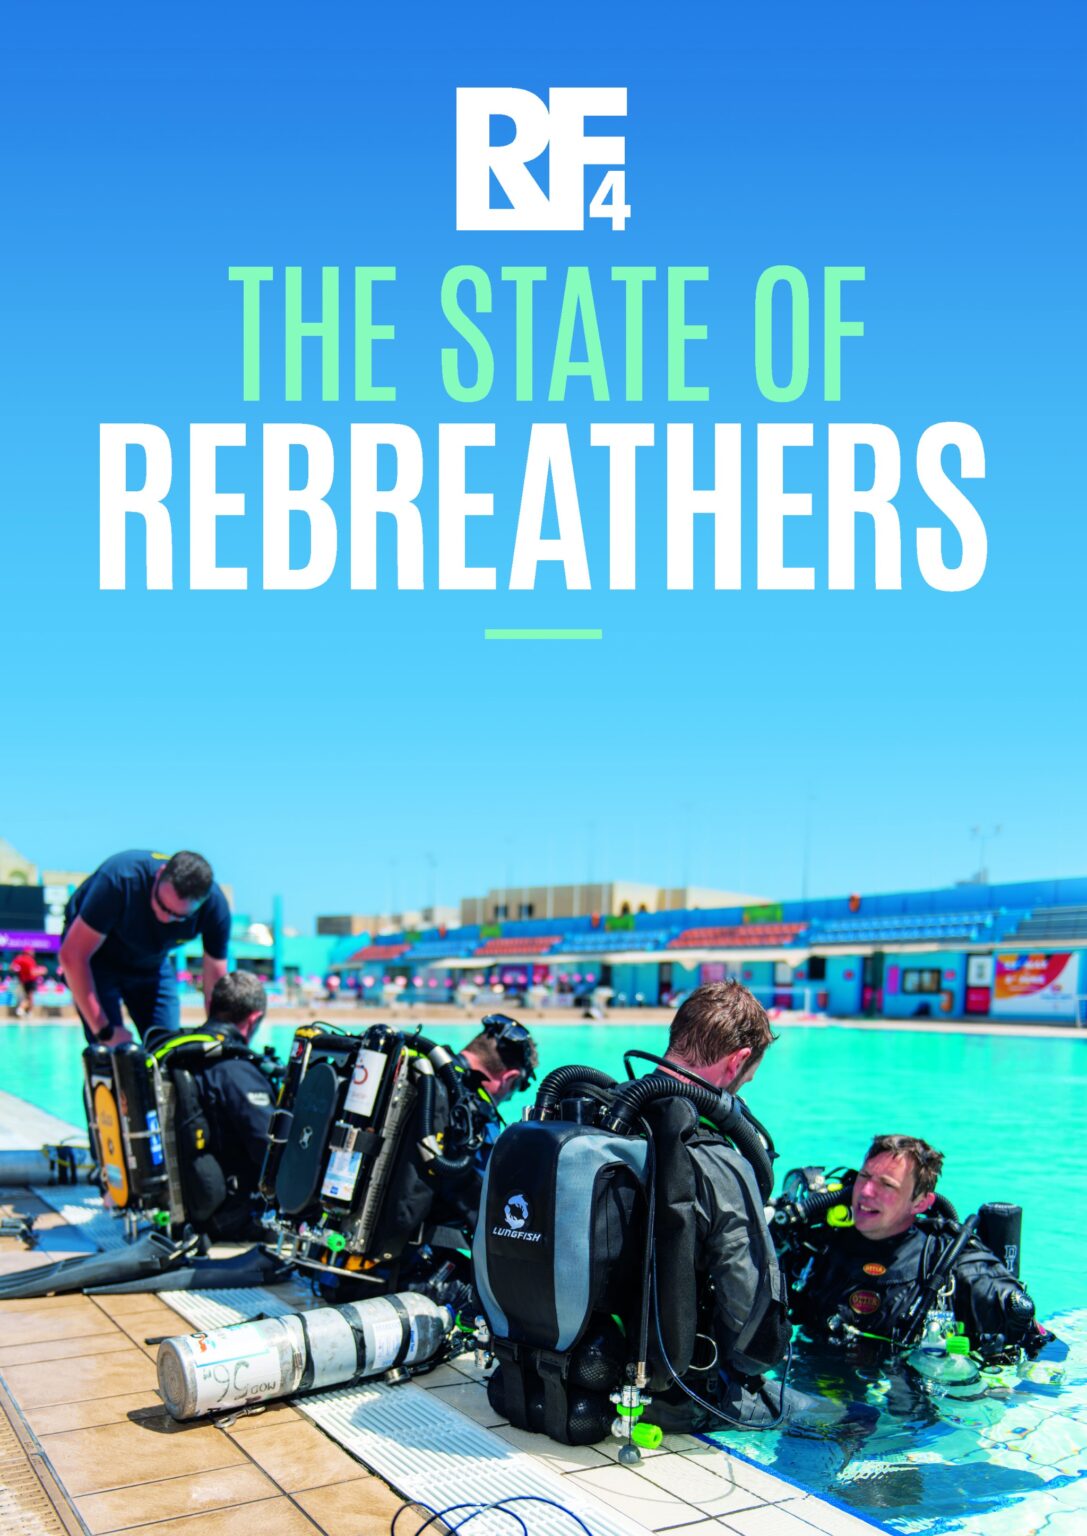 The State of Rebreathers